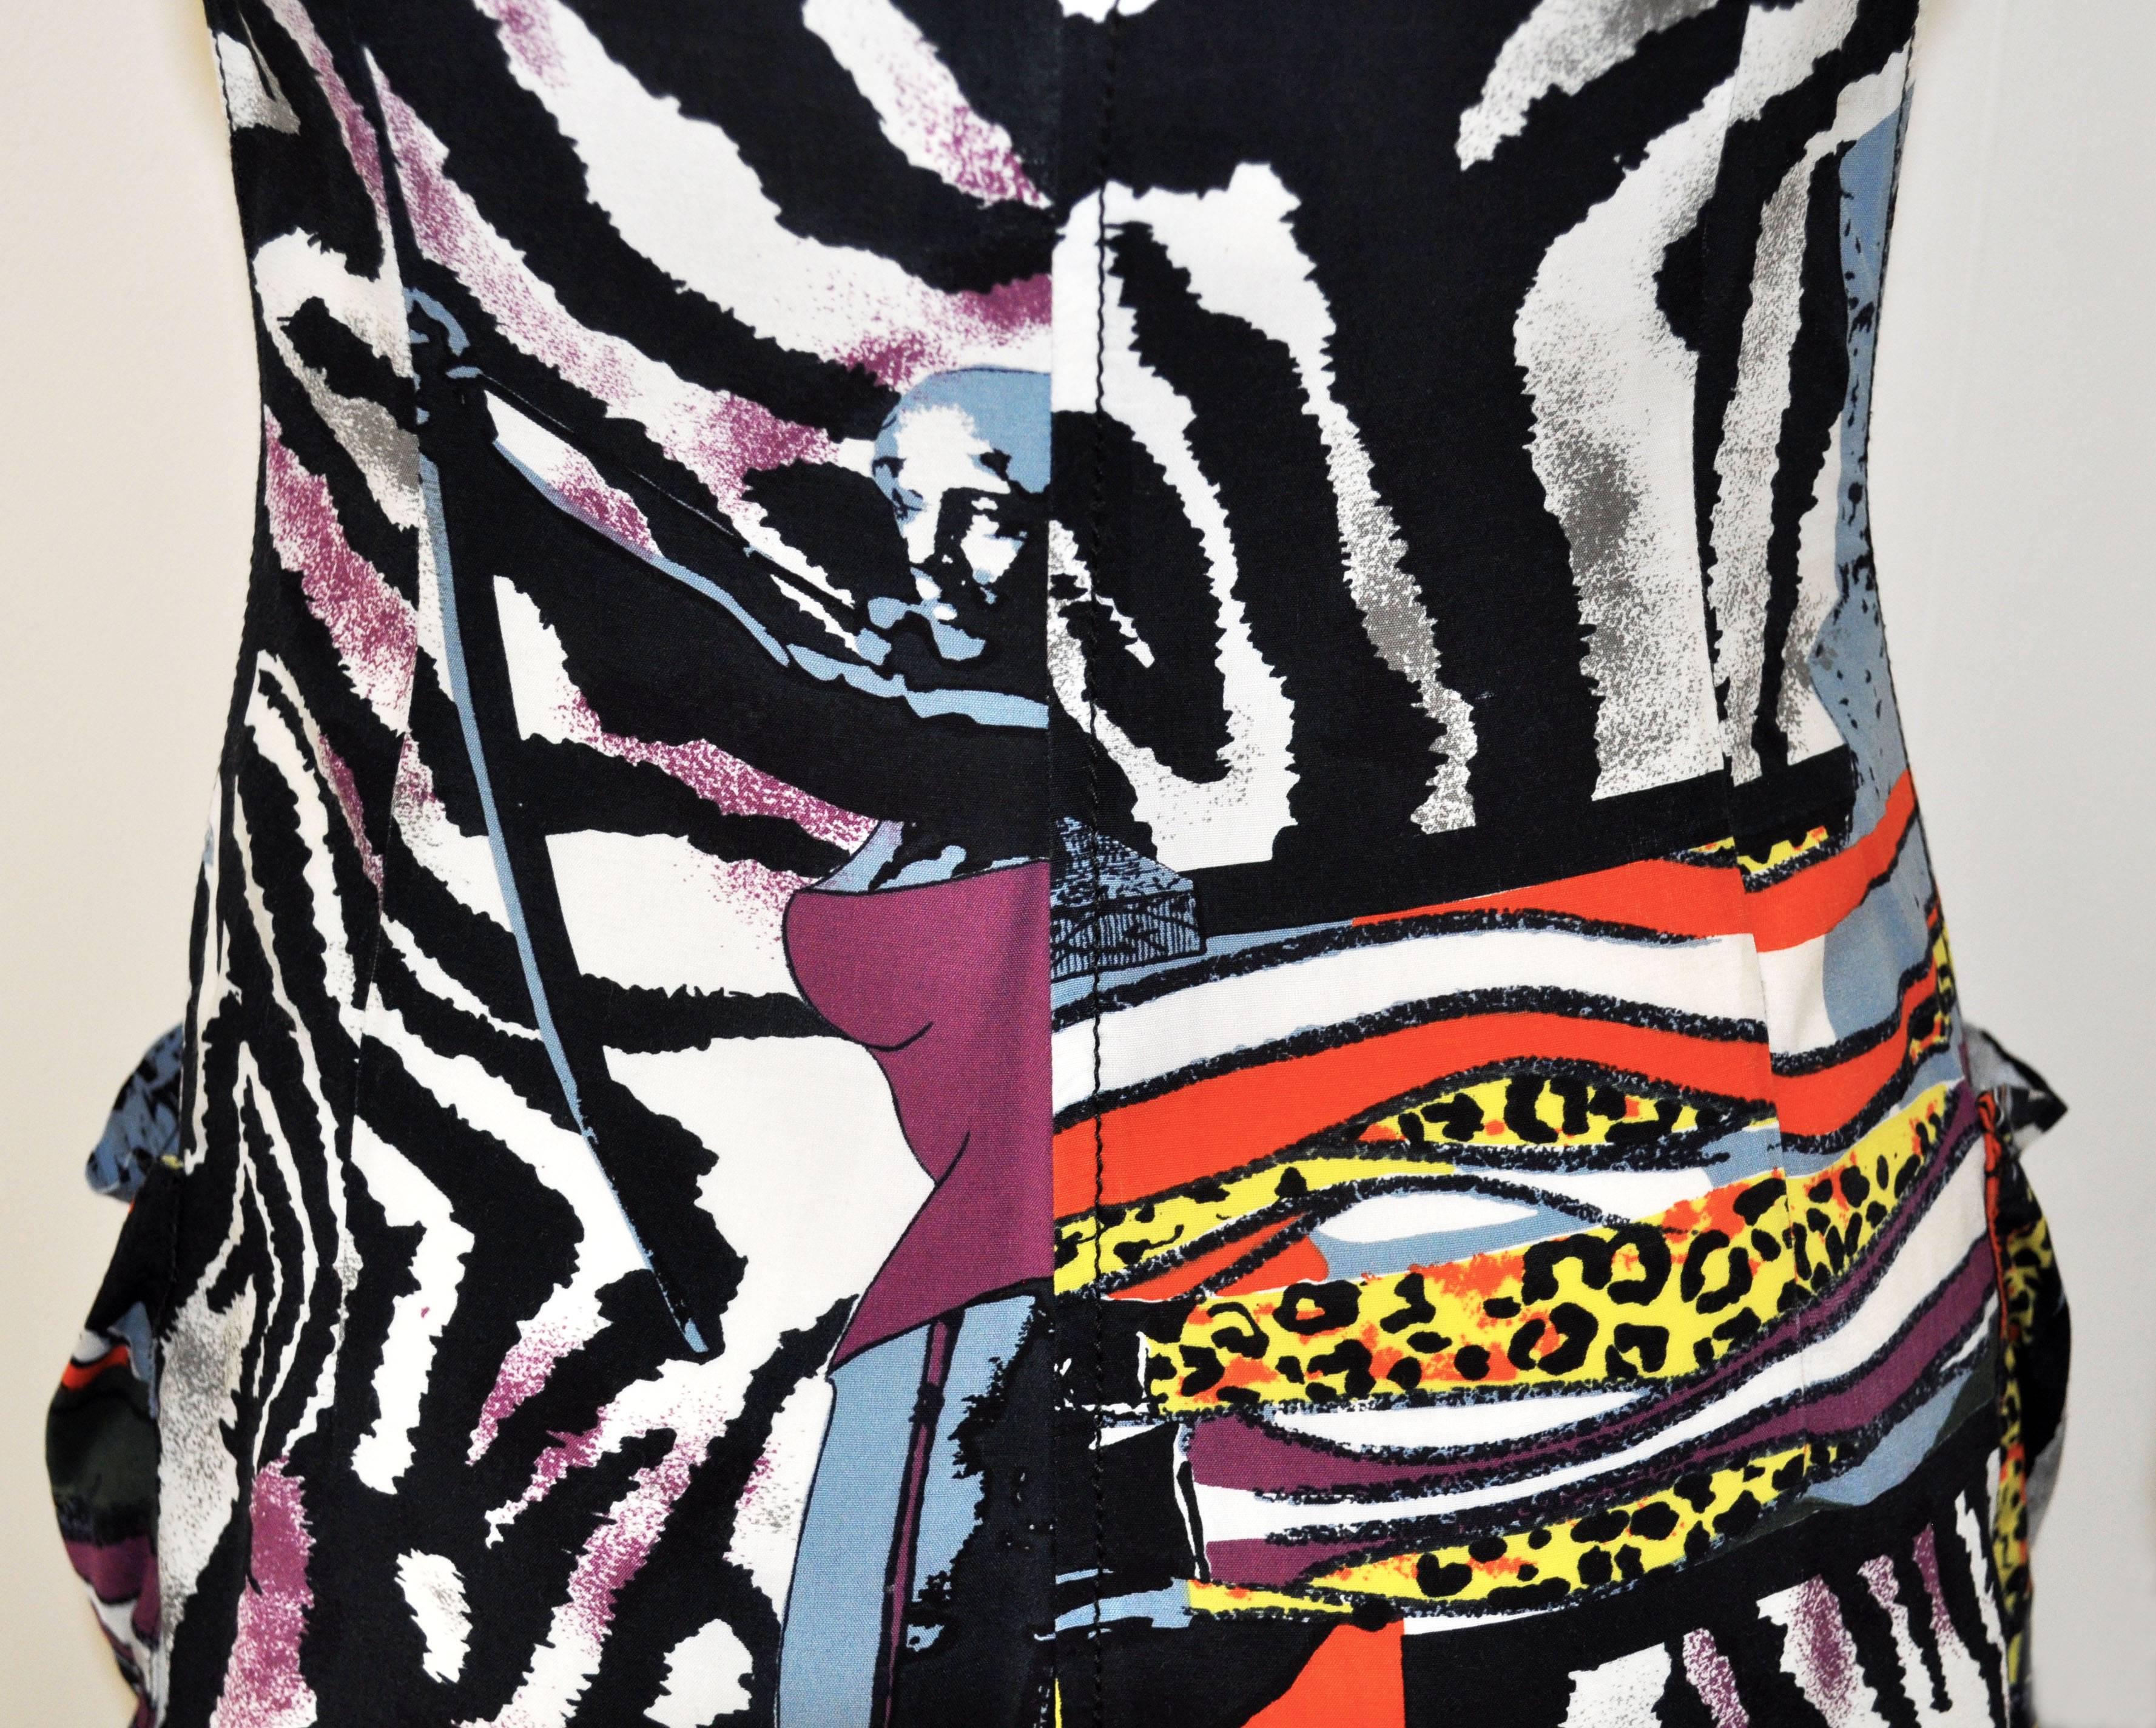 1990’s Junior by Jean Paul Gaultier light Summer dress with camisole straps and button down front. The multicoloured mixed print fabric features zebra print, cheetah print, and drawn figures in Jean Paul Gaultier’s signature humorous and surreal